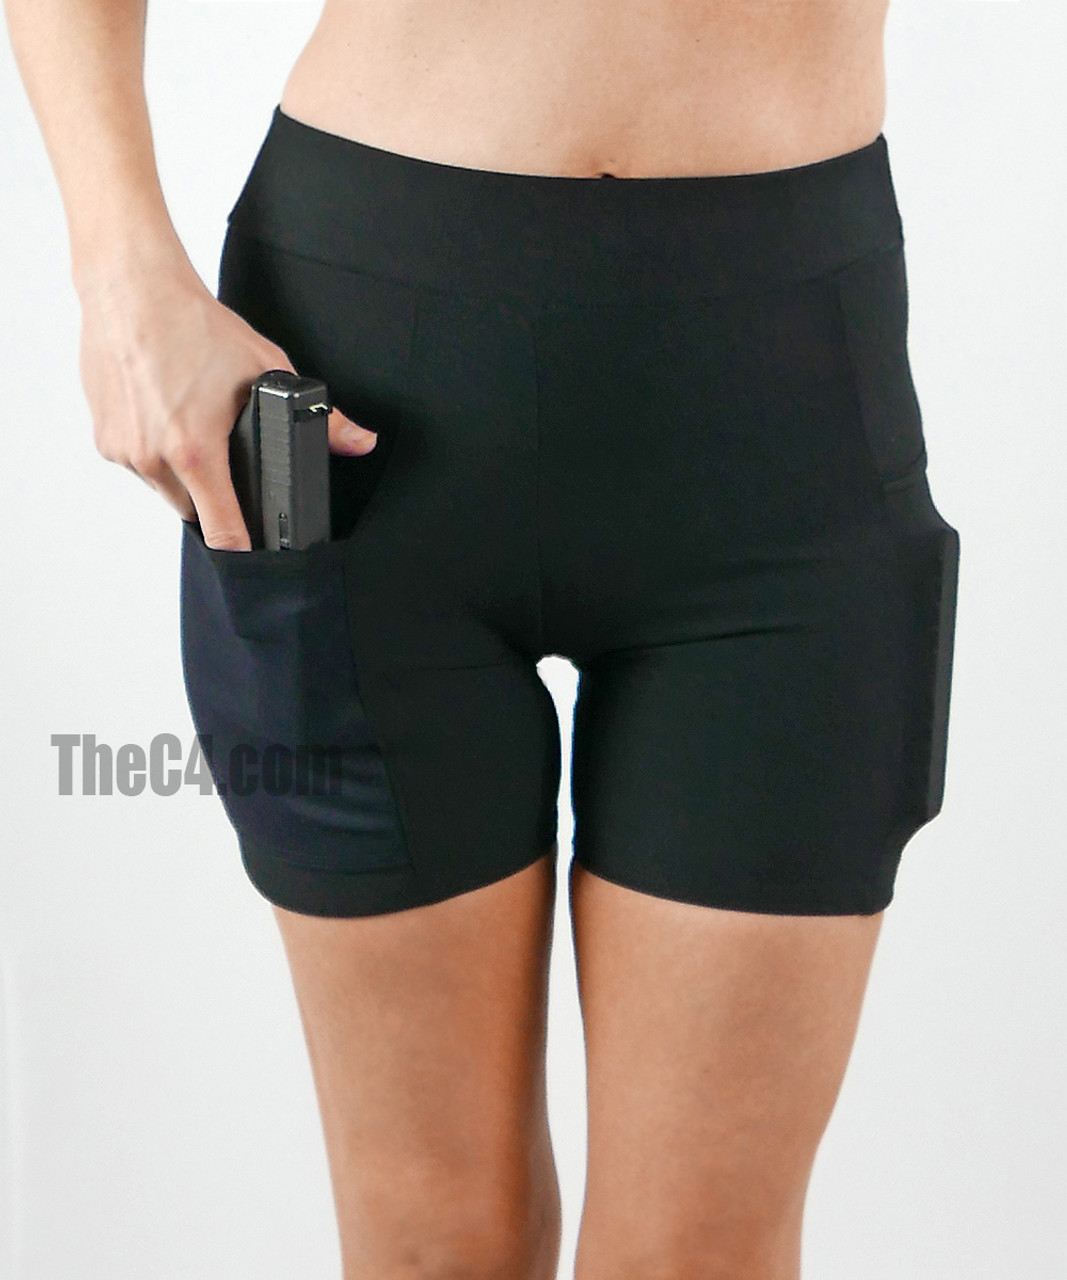 Graystone Gun Holster Shorts Concealed Carry Compression Women's